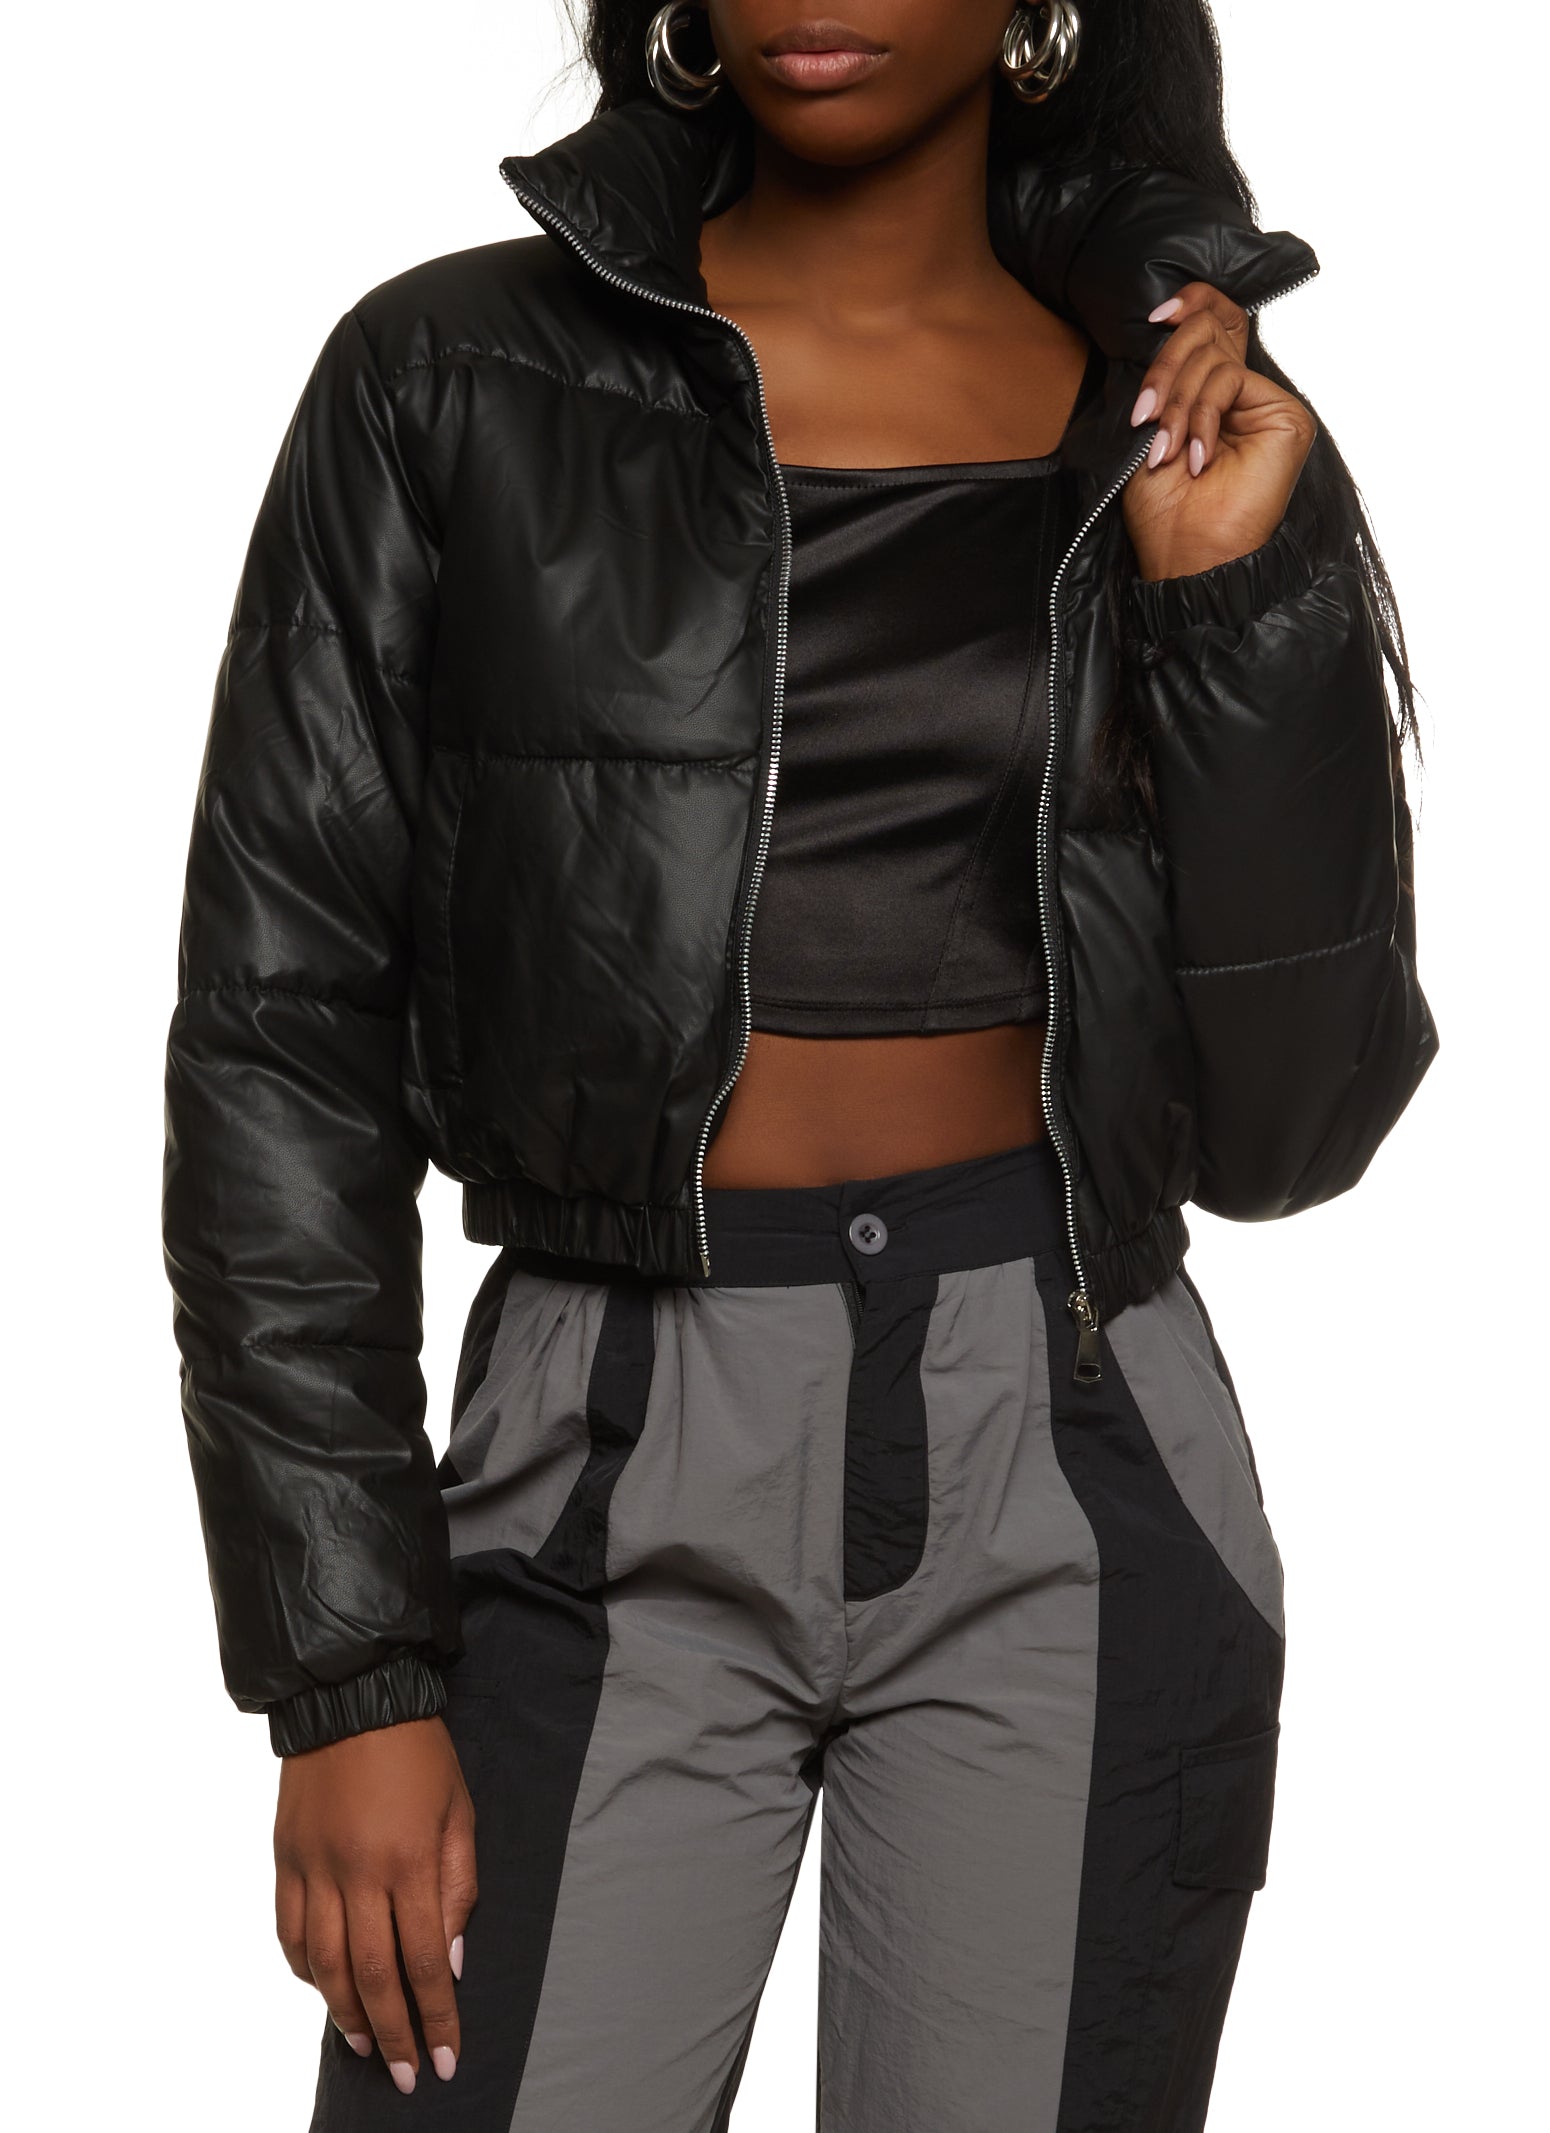 Womens Leather Clothing, Everyday Low Prices